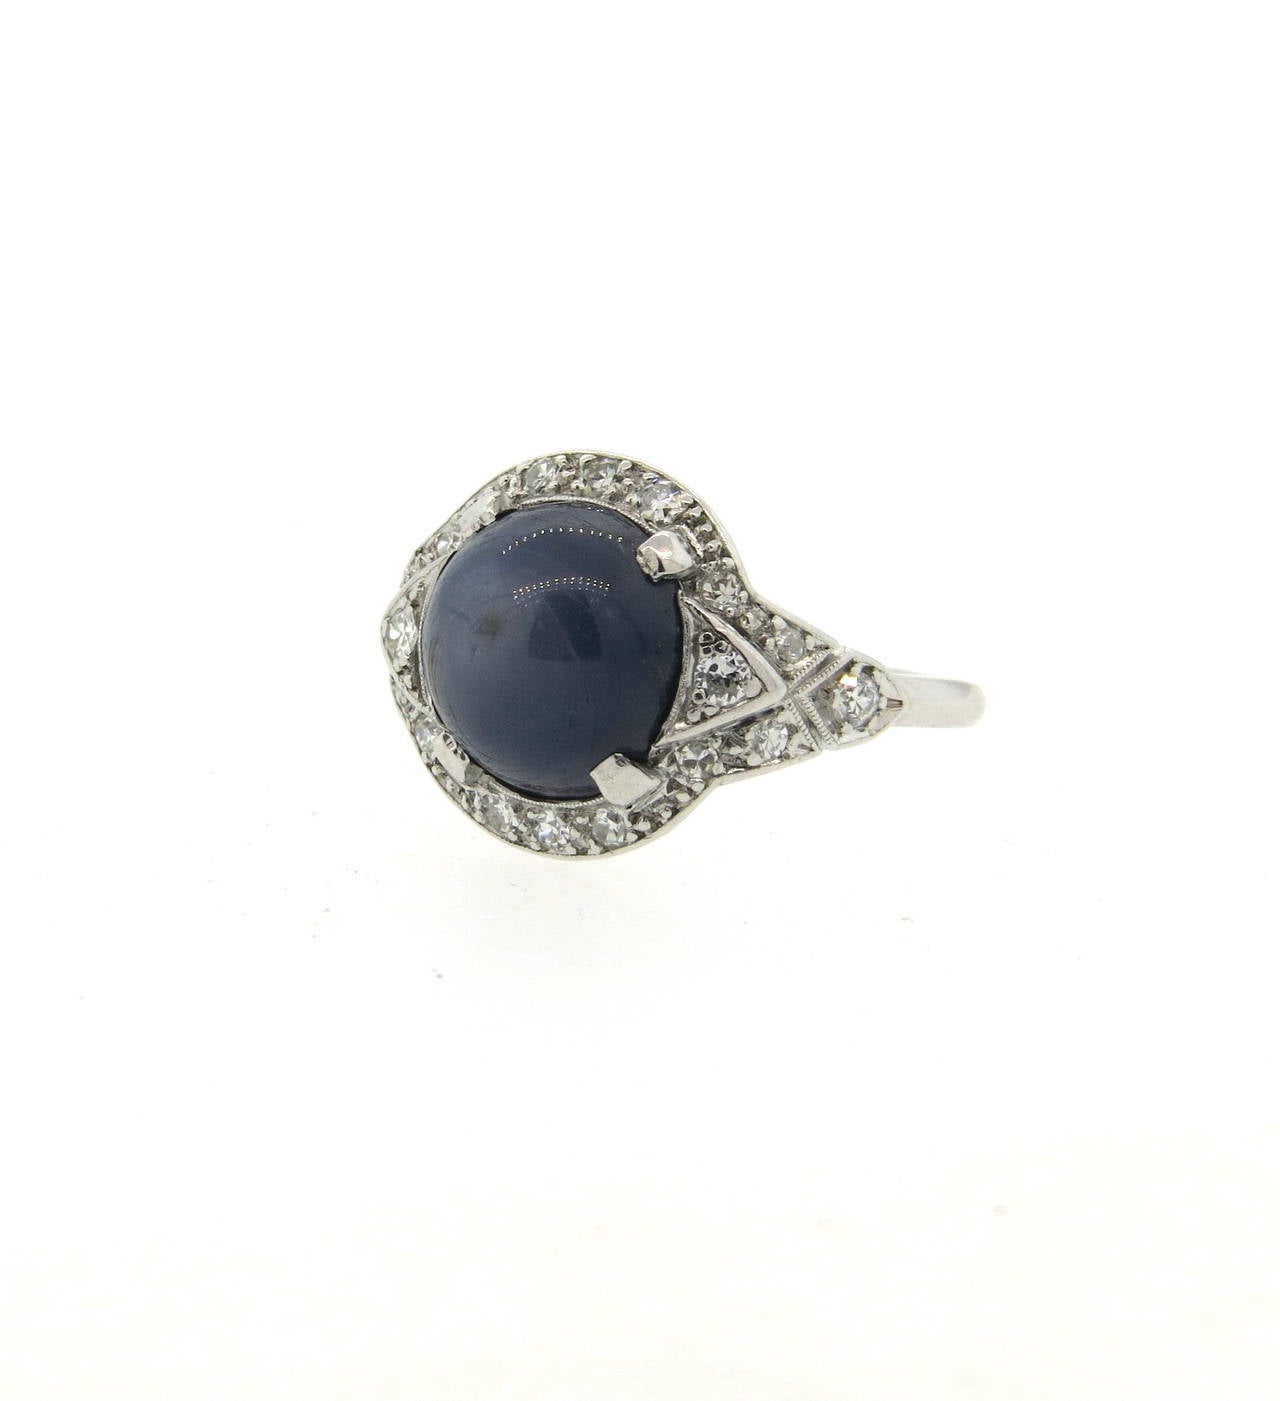 Antique platinum ring, set with a 10.1mm star sapphire cabochon, surrounded with diamonds. Ring is a size 6 1/4, top measures 14mm in diameter. Weight of the piece - 6.8 grams